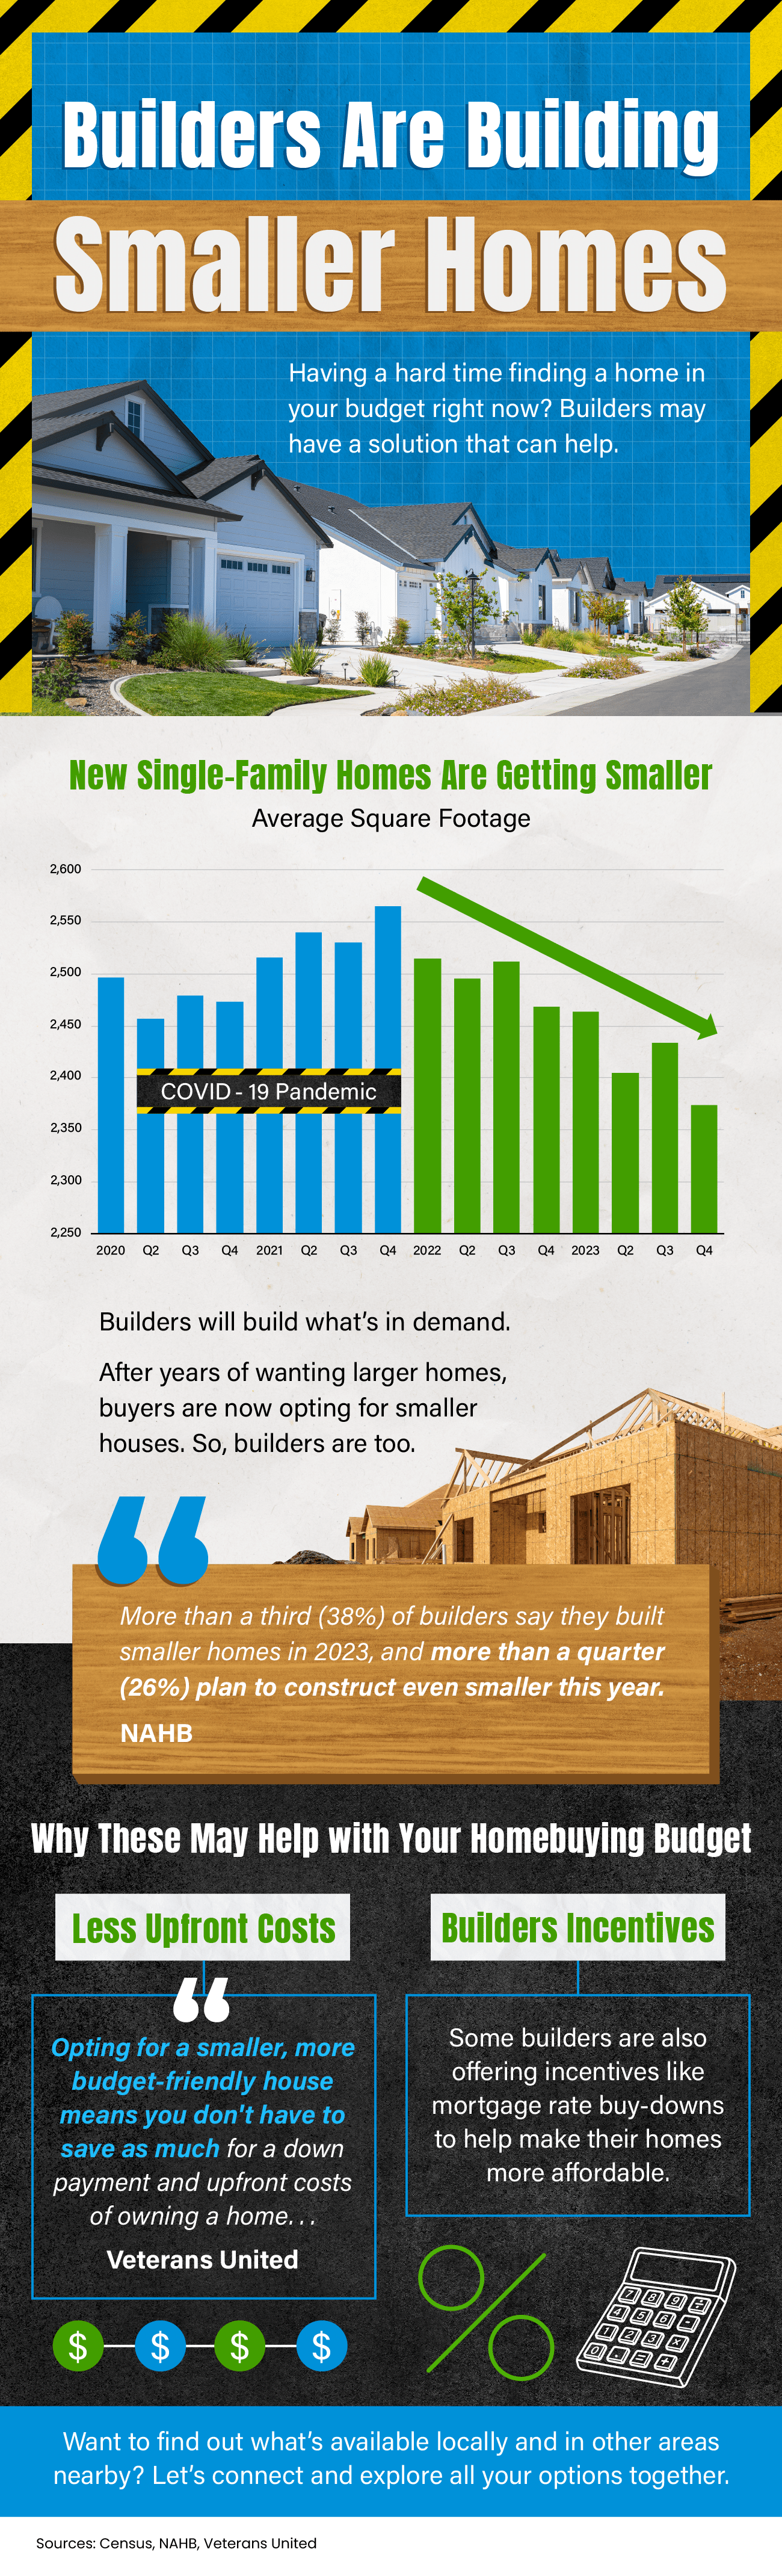 Builders Are Building Smaller Homes [INFOGRAPHIC]